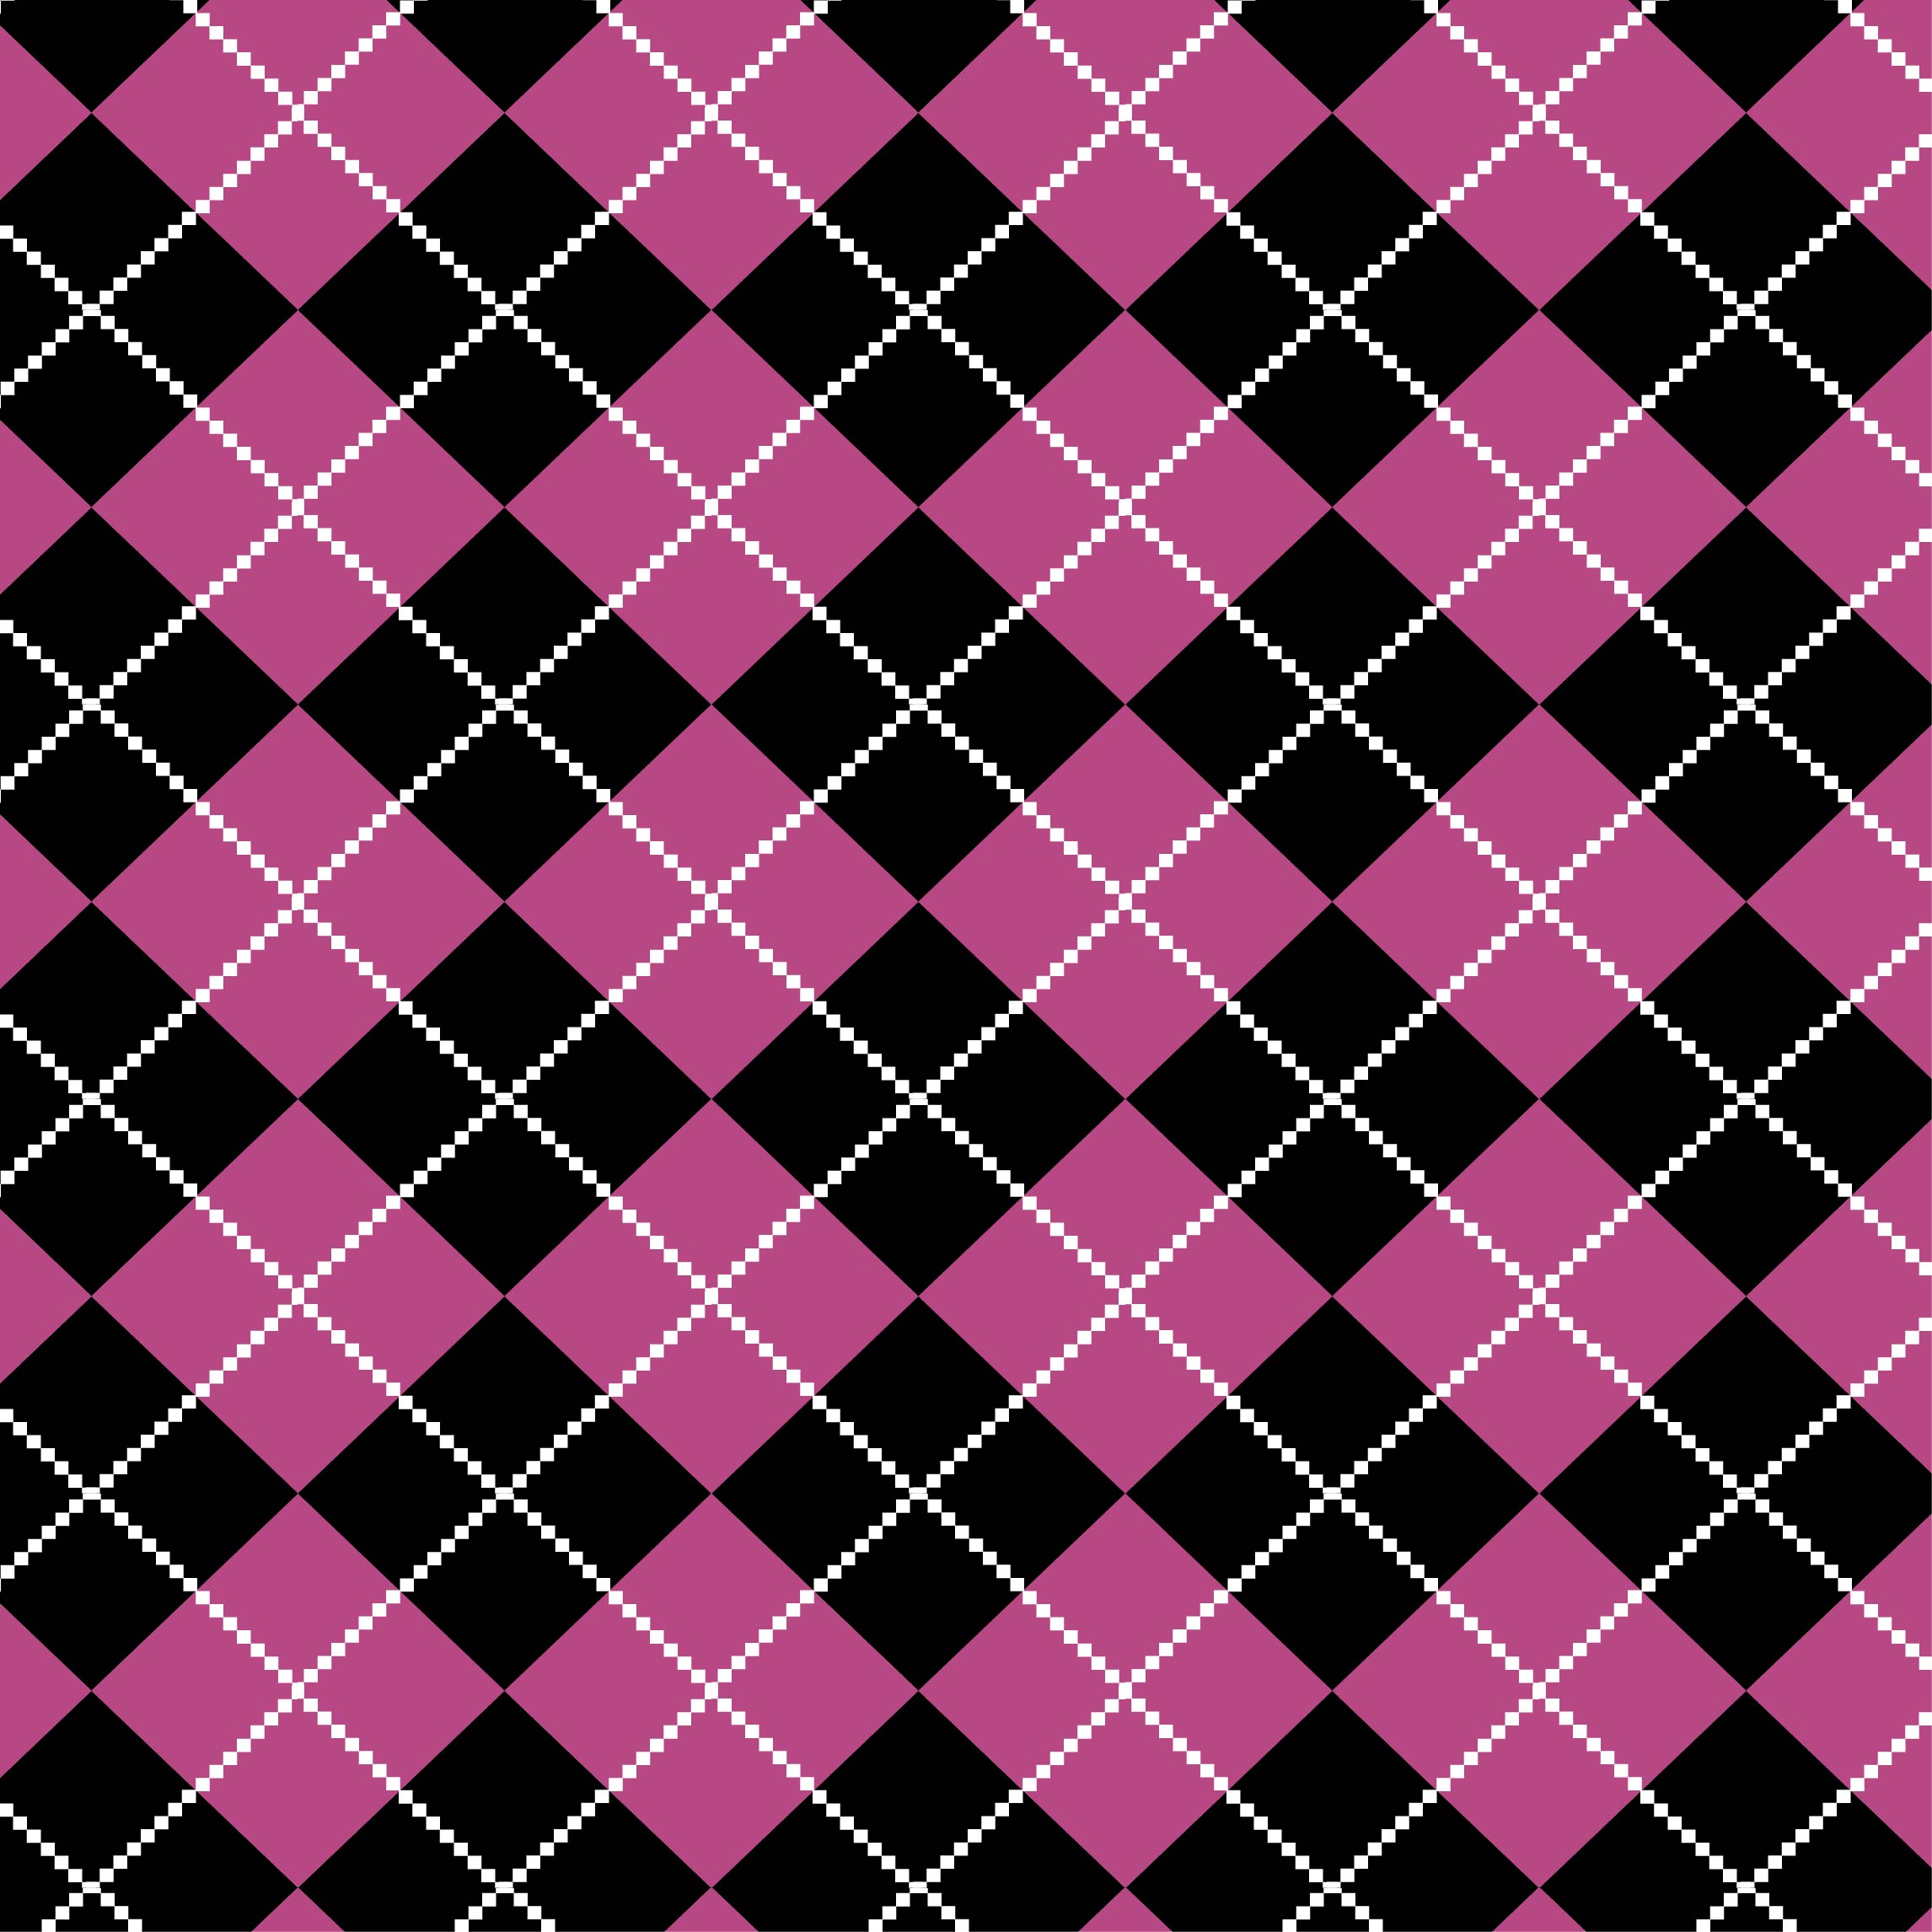 Pattern preview image.